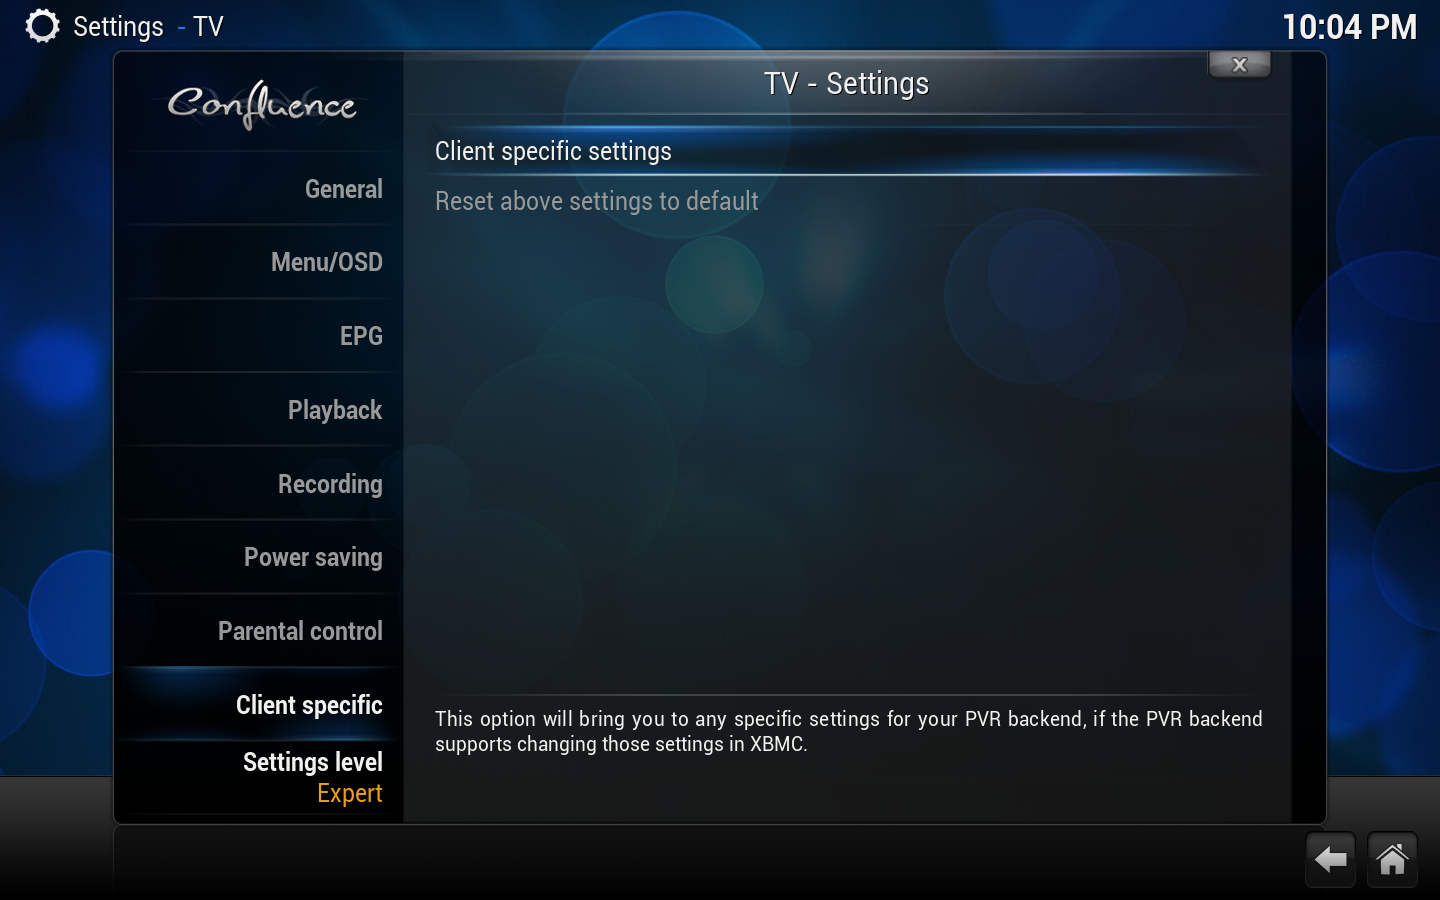 File:Settings.PVR.client specific.png